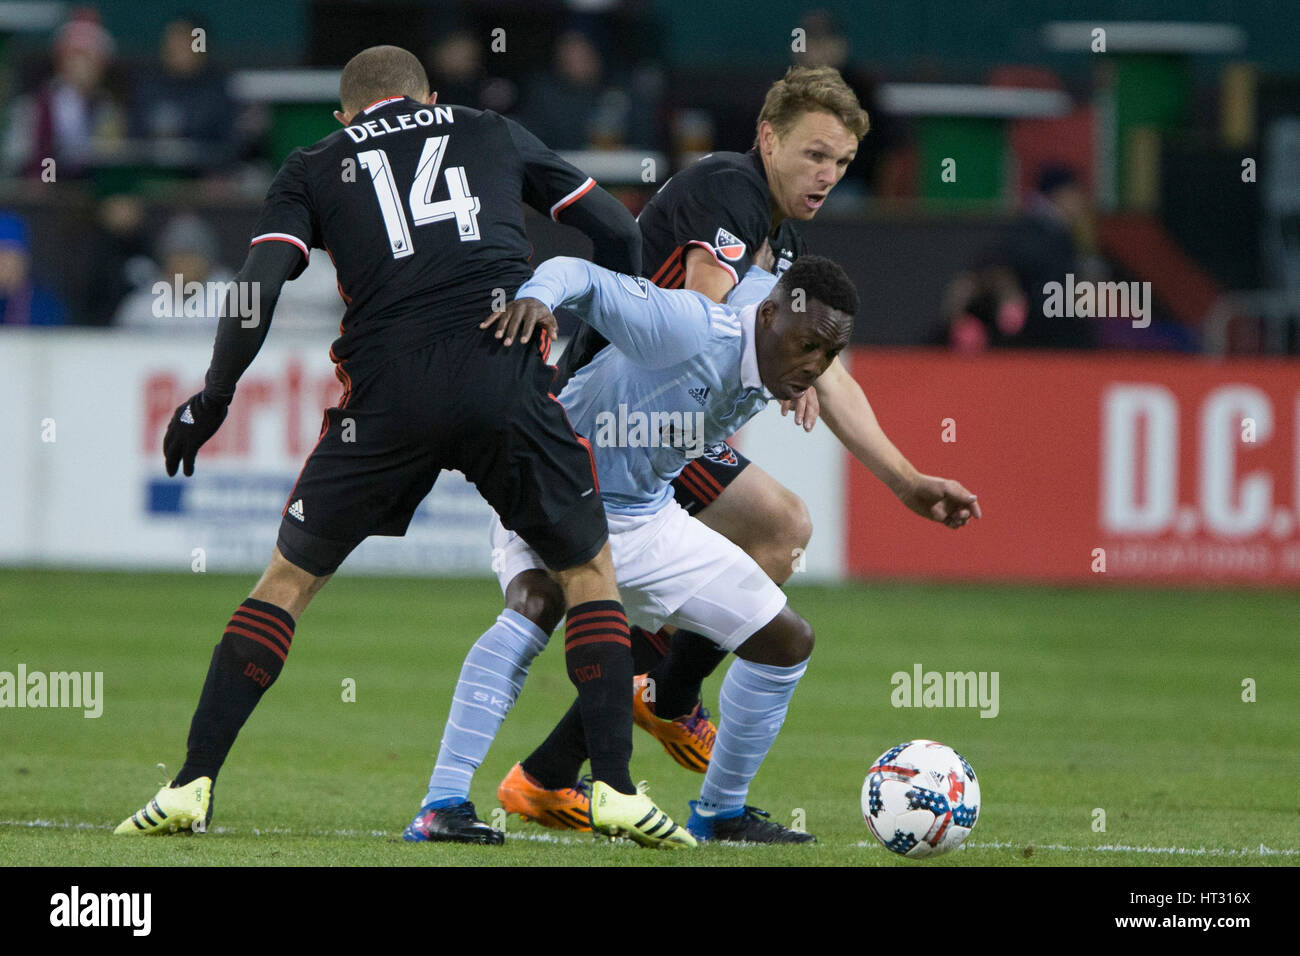 Sporting Kansas City forward Gerso Fernades (7) fights off D.C. United midfielder Nick DeLeon (14) and D.C. United defender Taylor Kemp (2) during D.C. United's home opener against Sporting Kansas City which finished 0-0 at RFK Stadium in Washington, D.C. Stock Photo